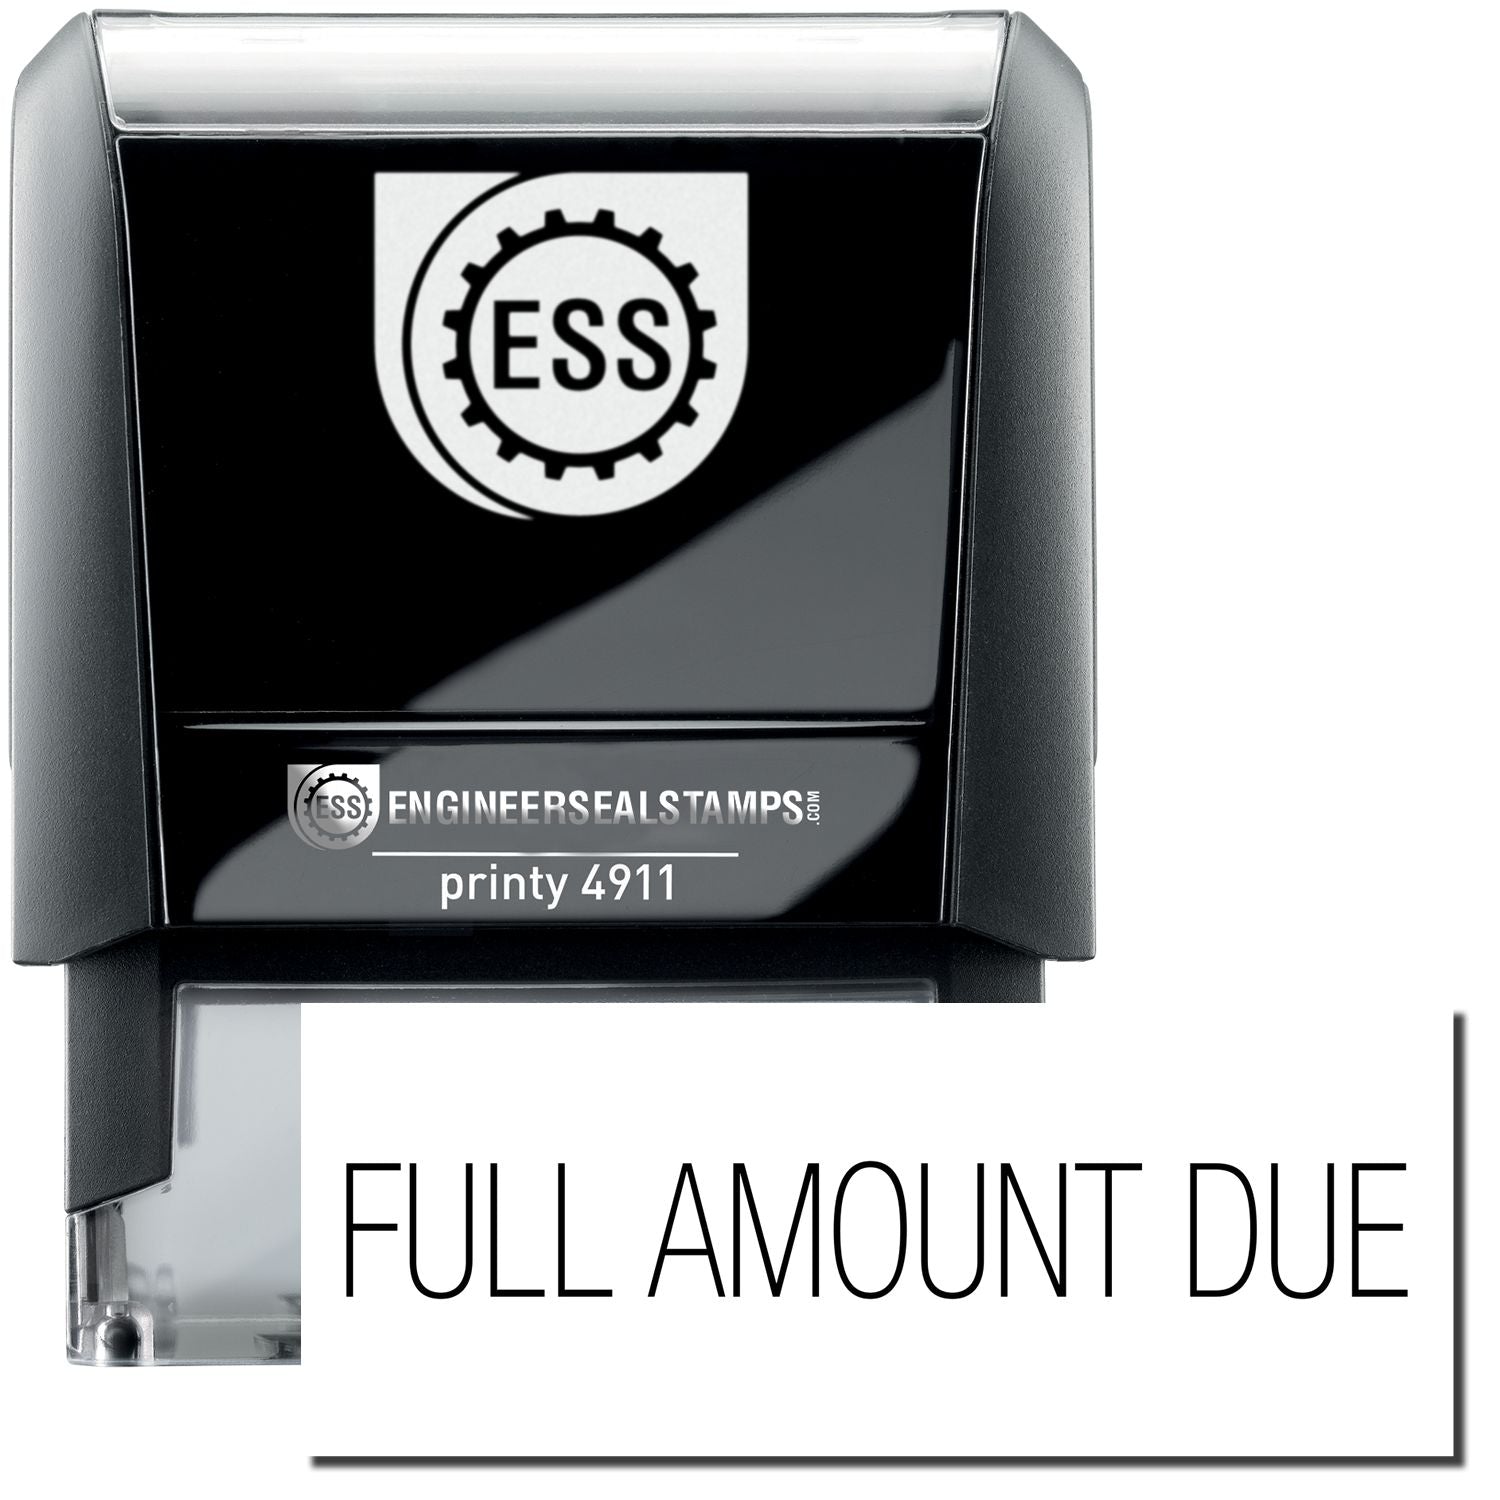 A self-inking stamp with a stamped image showing how the text "FULL AMOUNT DUE" is displayed after stamping.